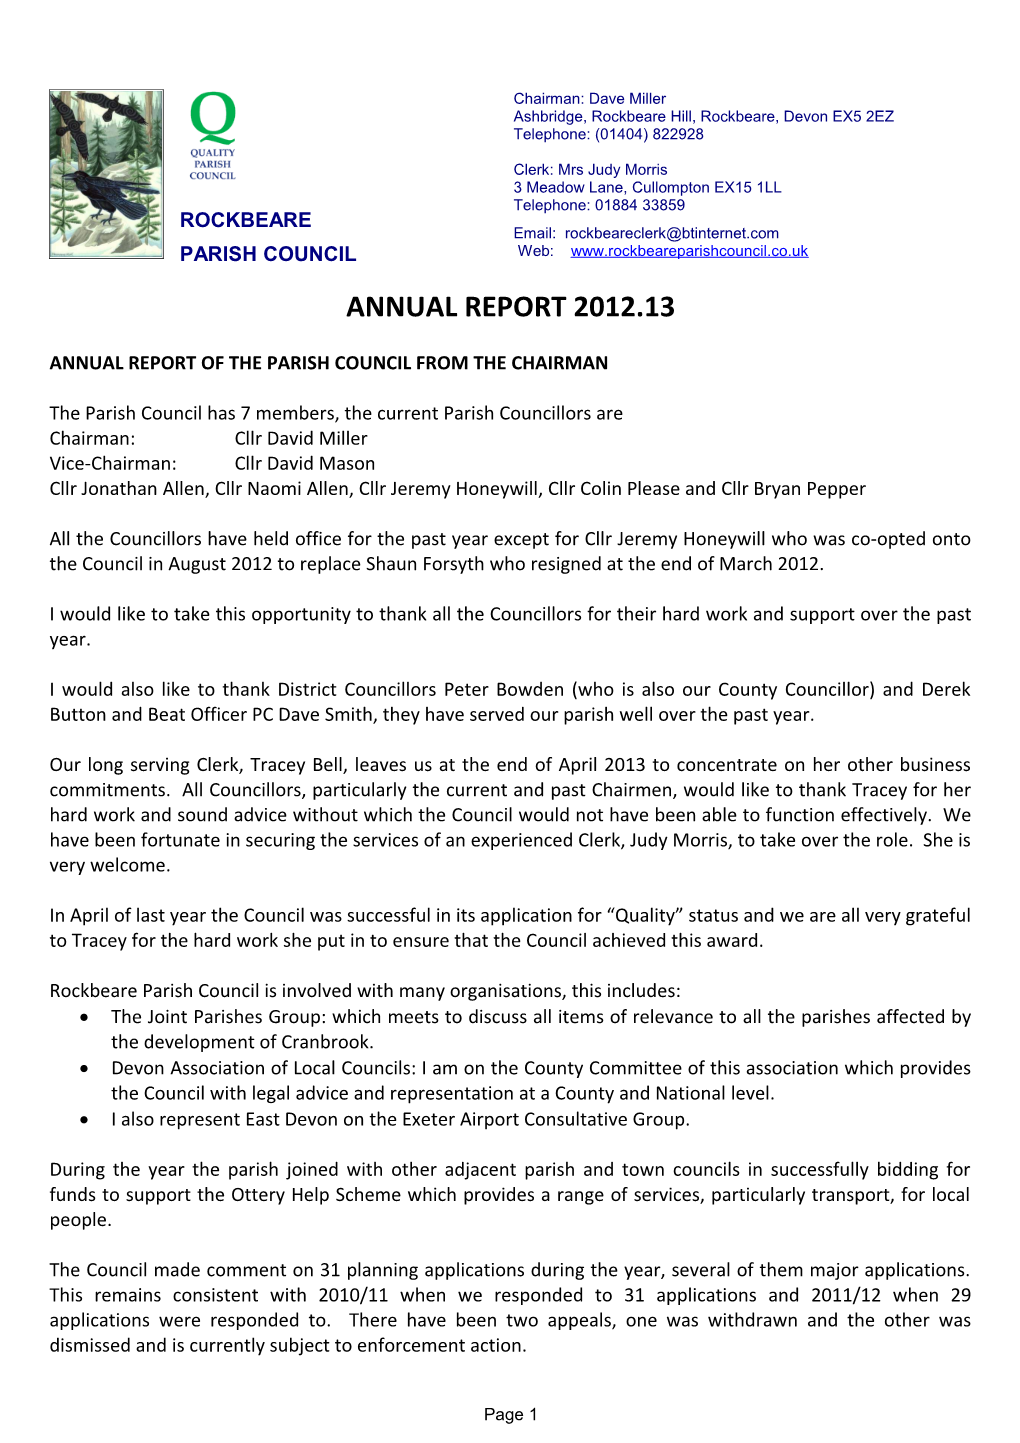 Annual Report of the Parish Council from the Chairman